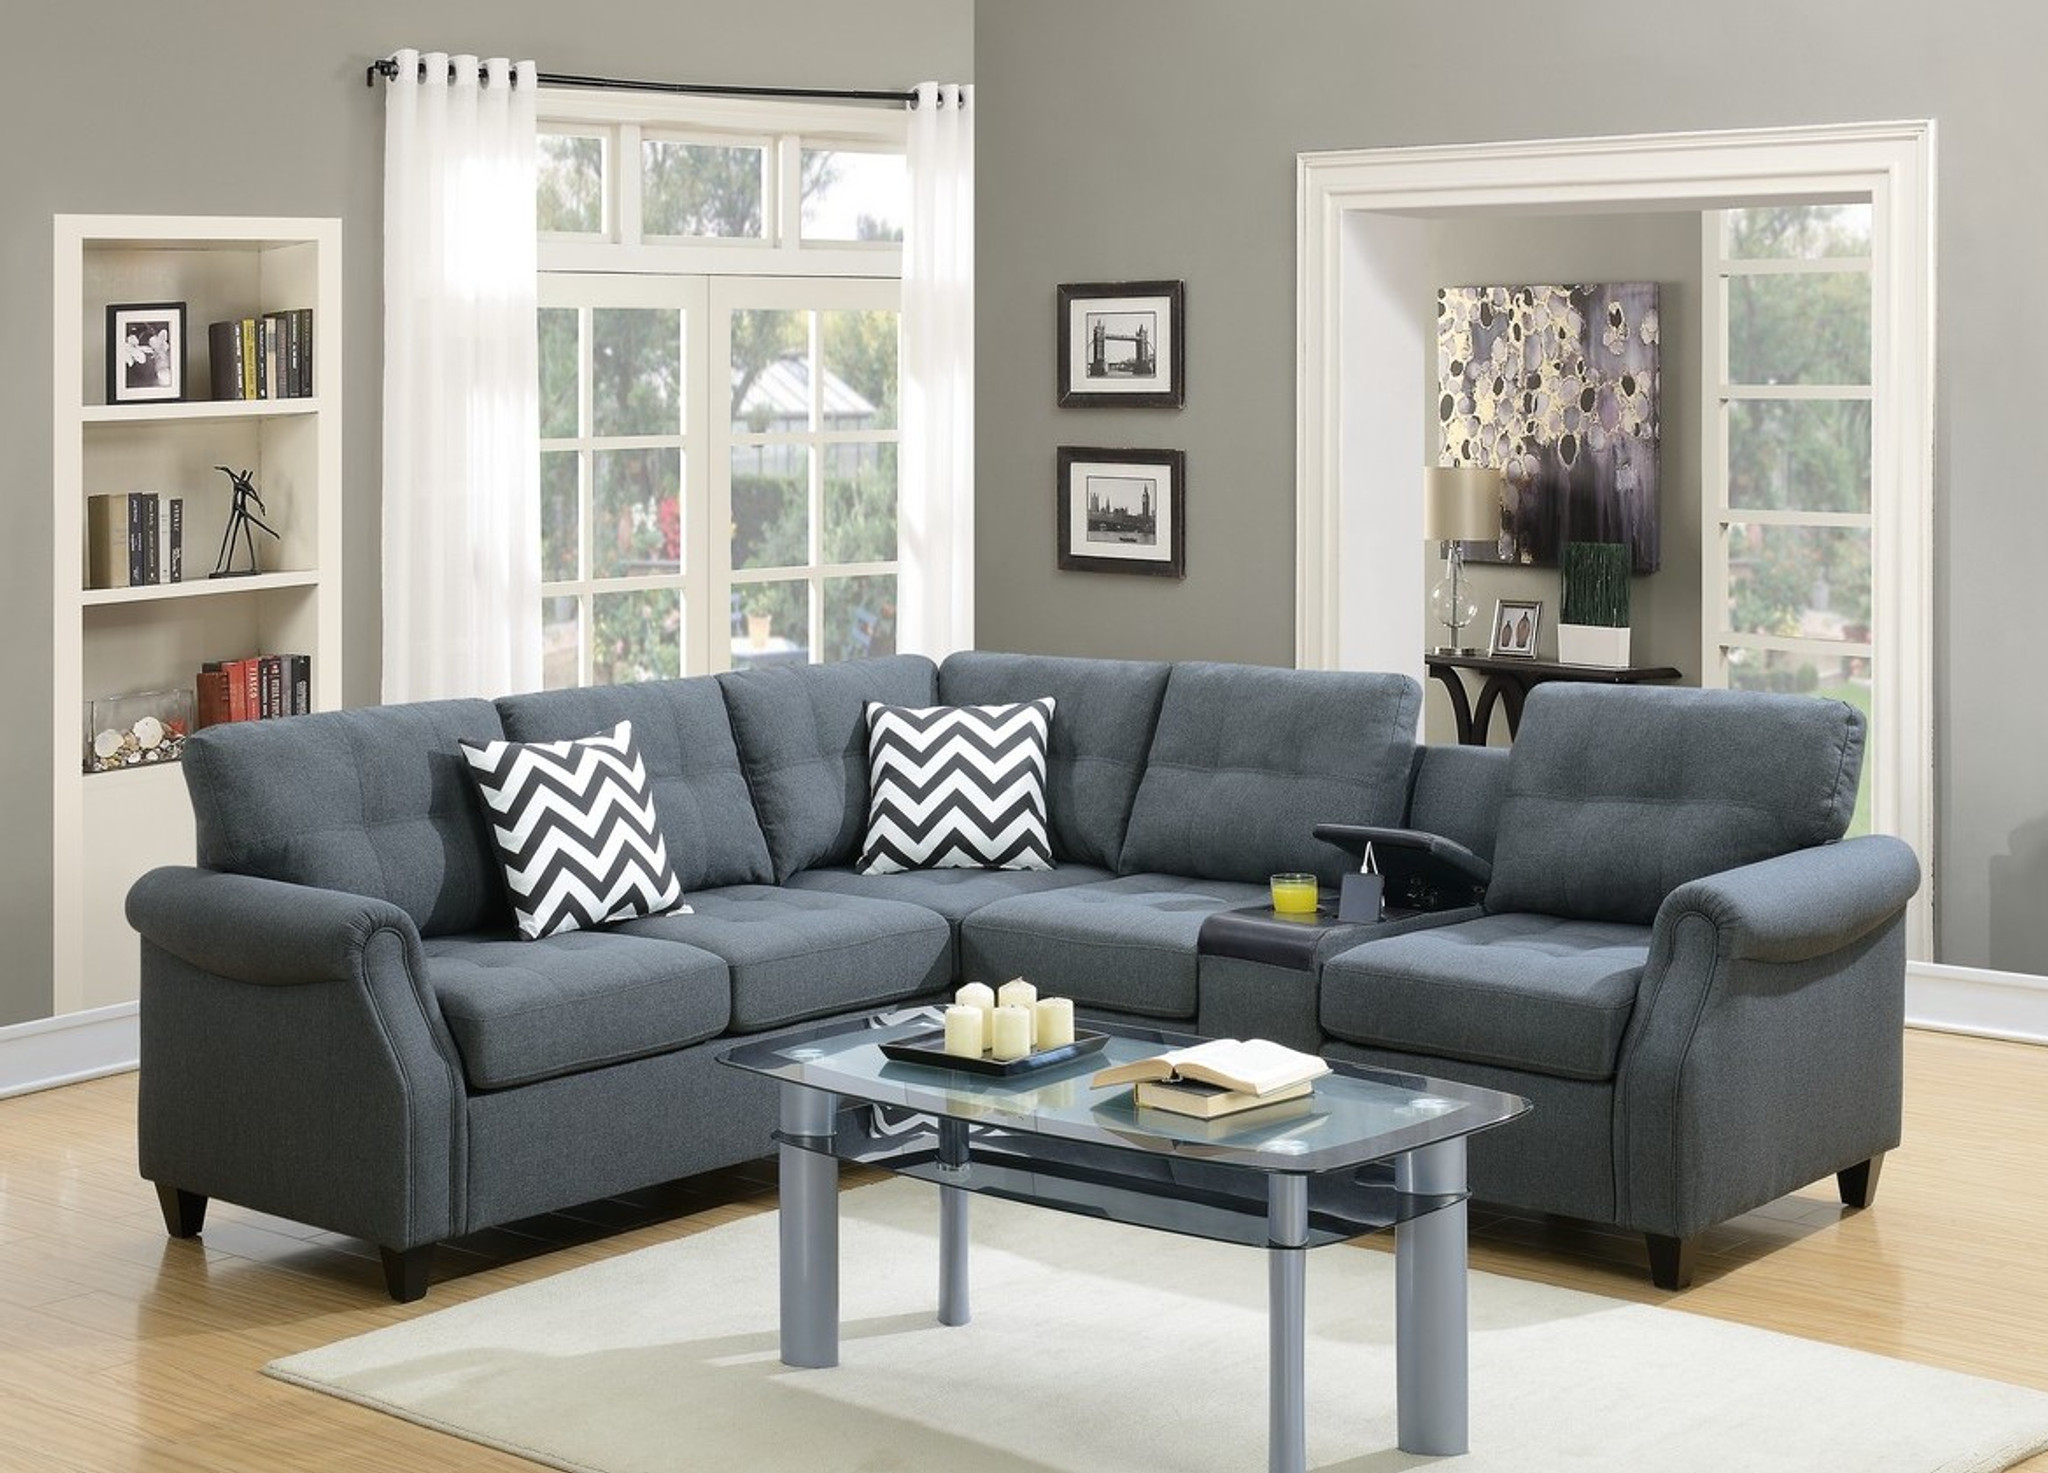 F6594 2PC FABIO MODULAR SECTIONAL SET IN BLUE GREY By Poundex